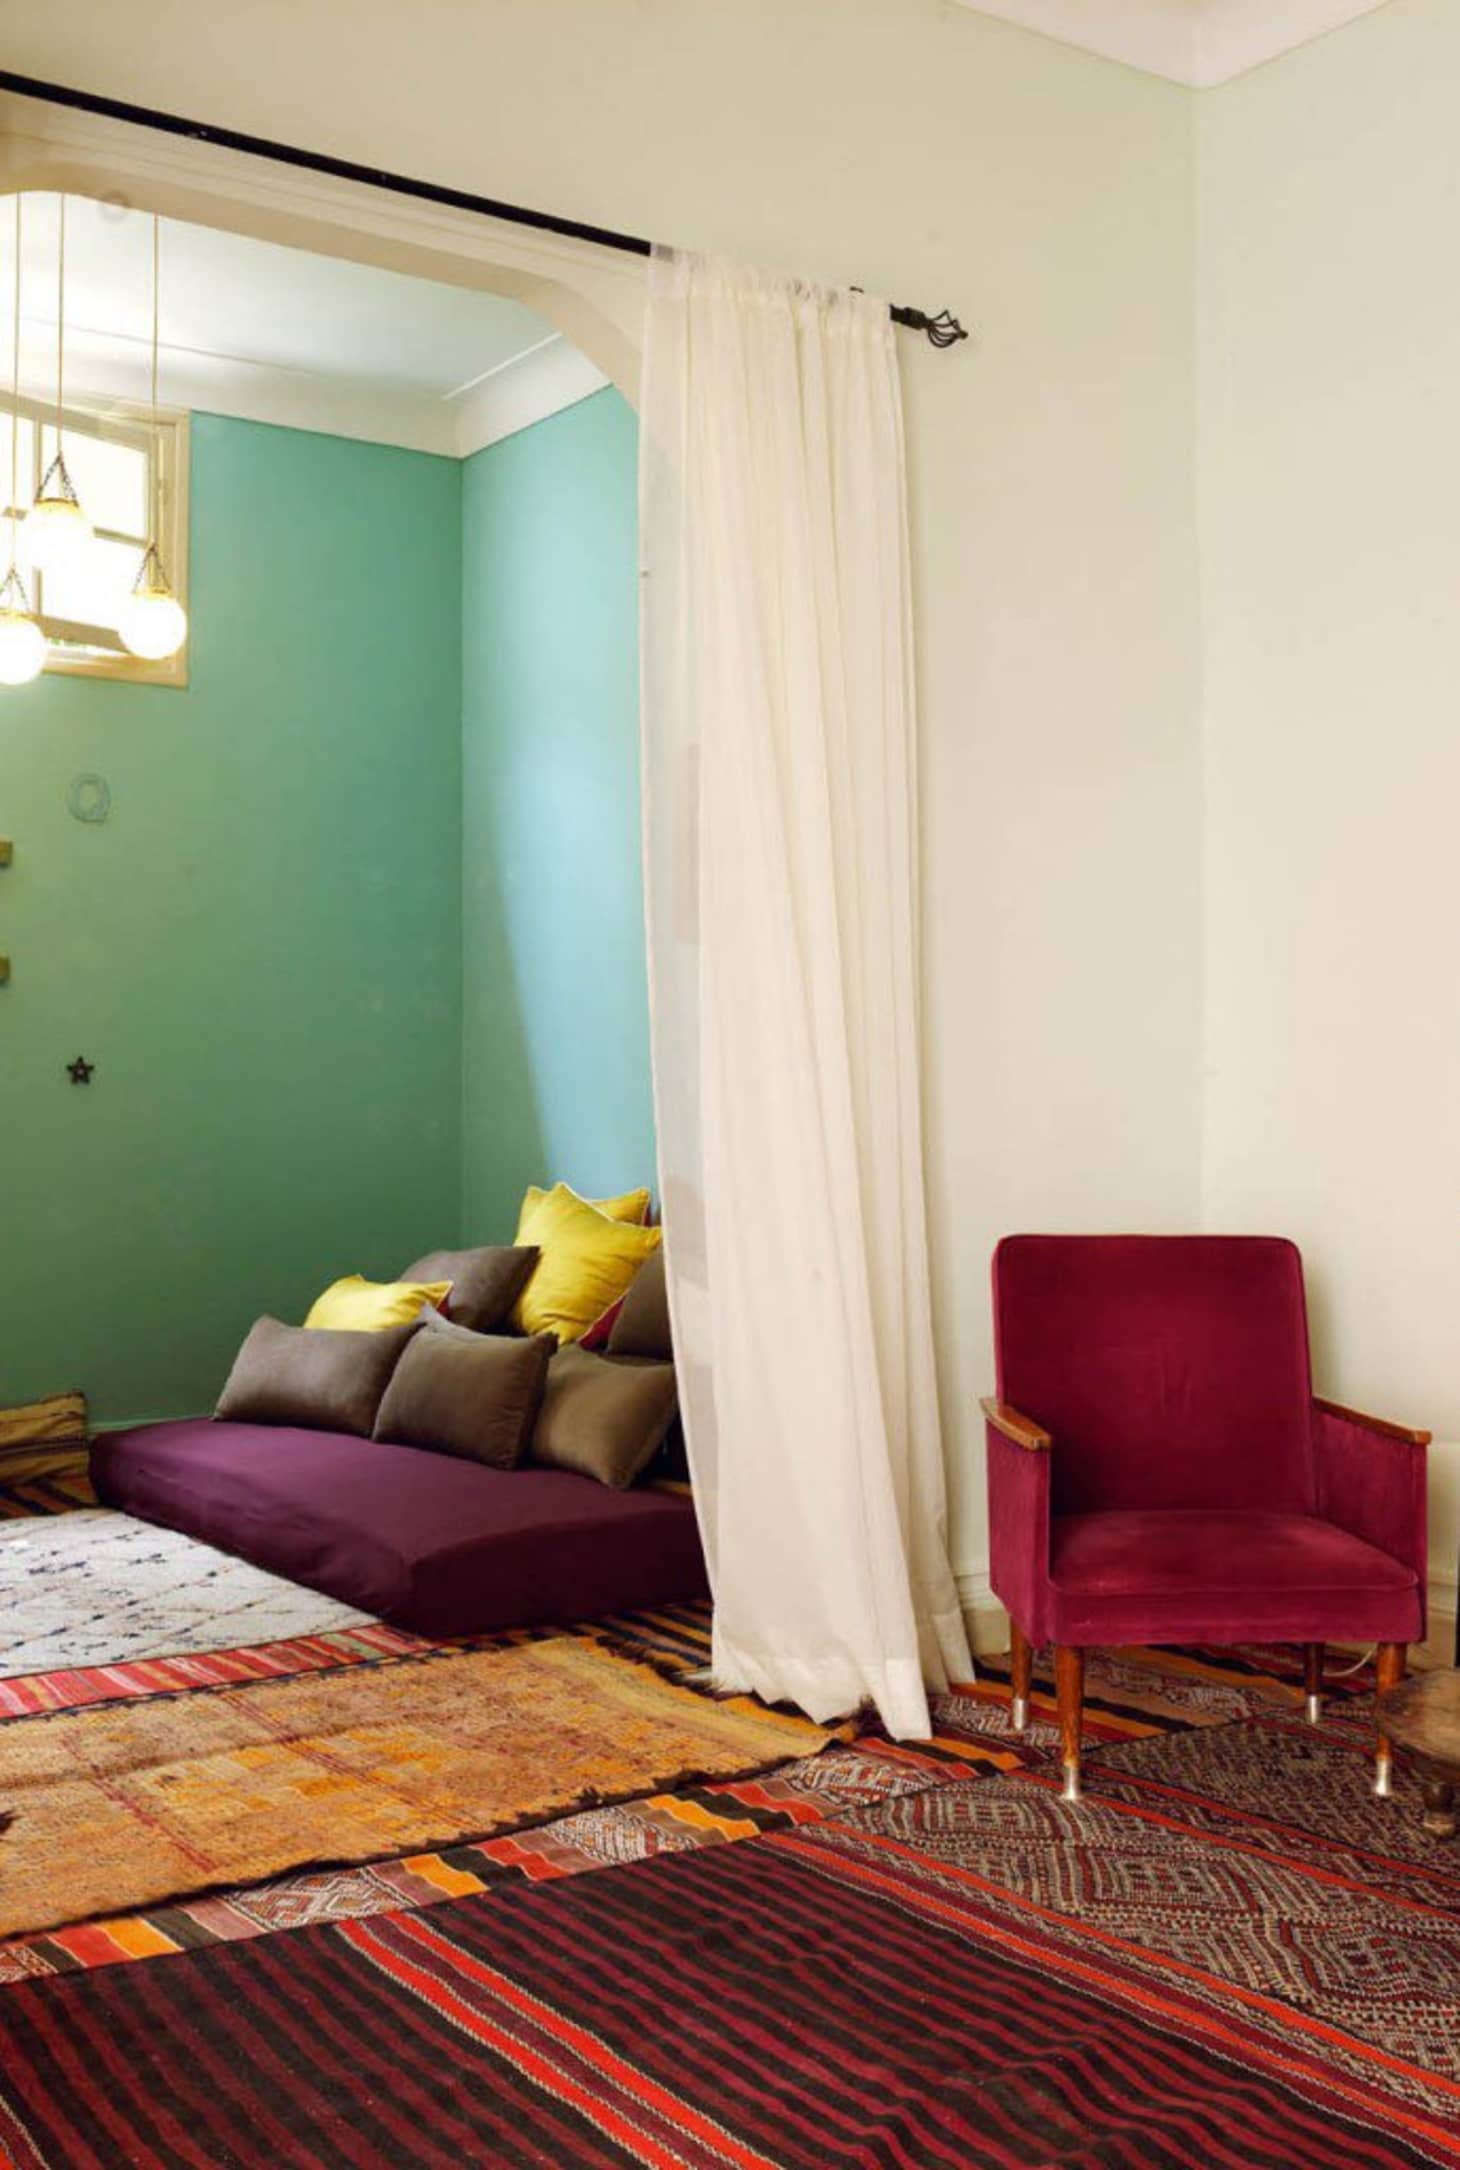 10 Ideas For Dividing Small Spaces Apartment Therapy